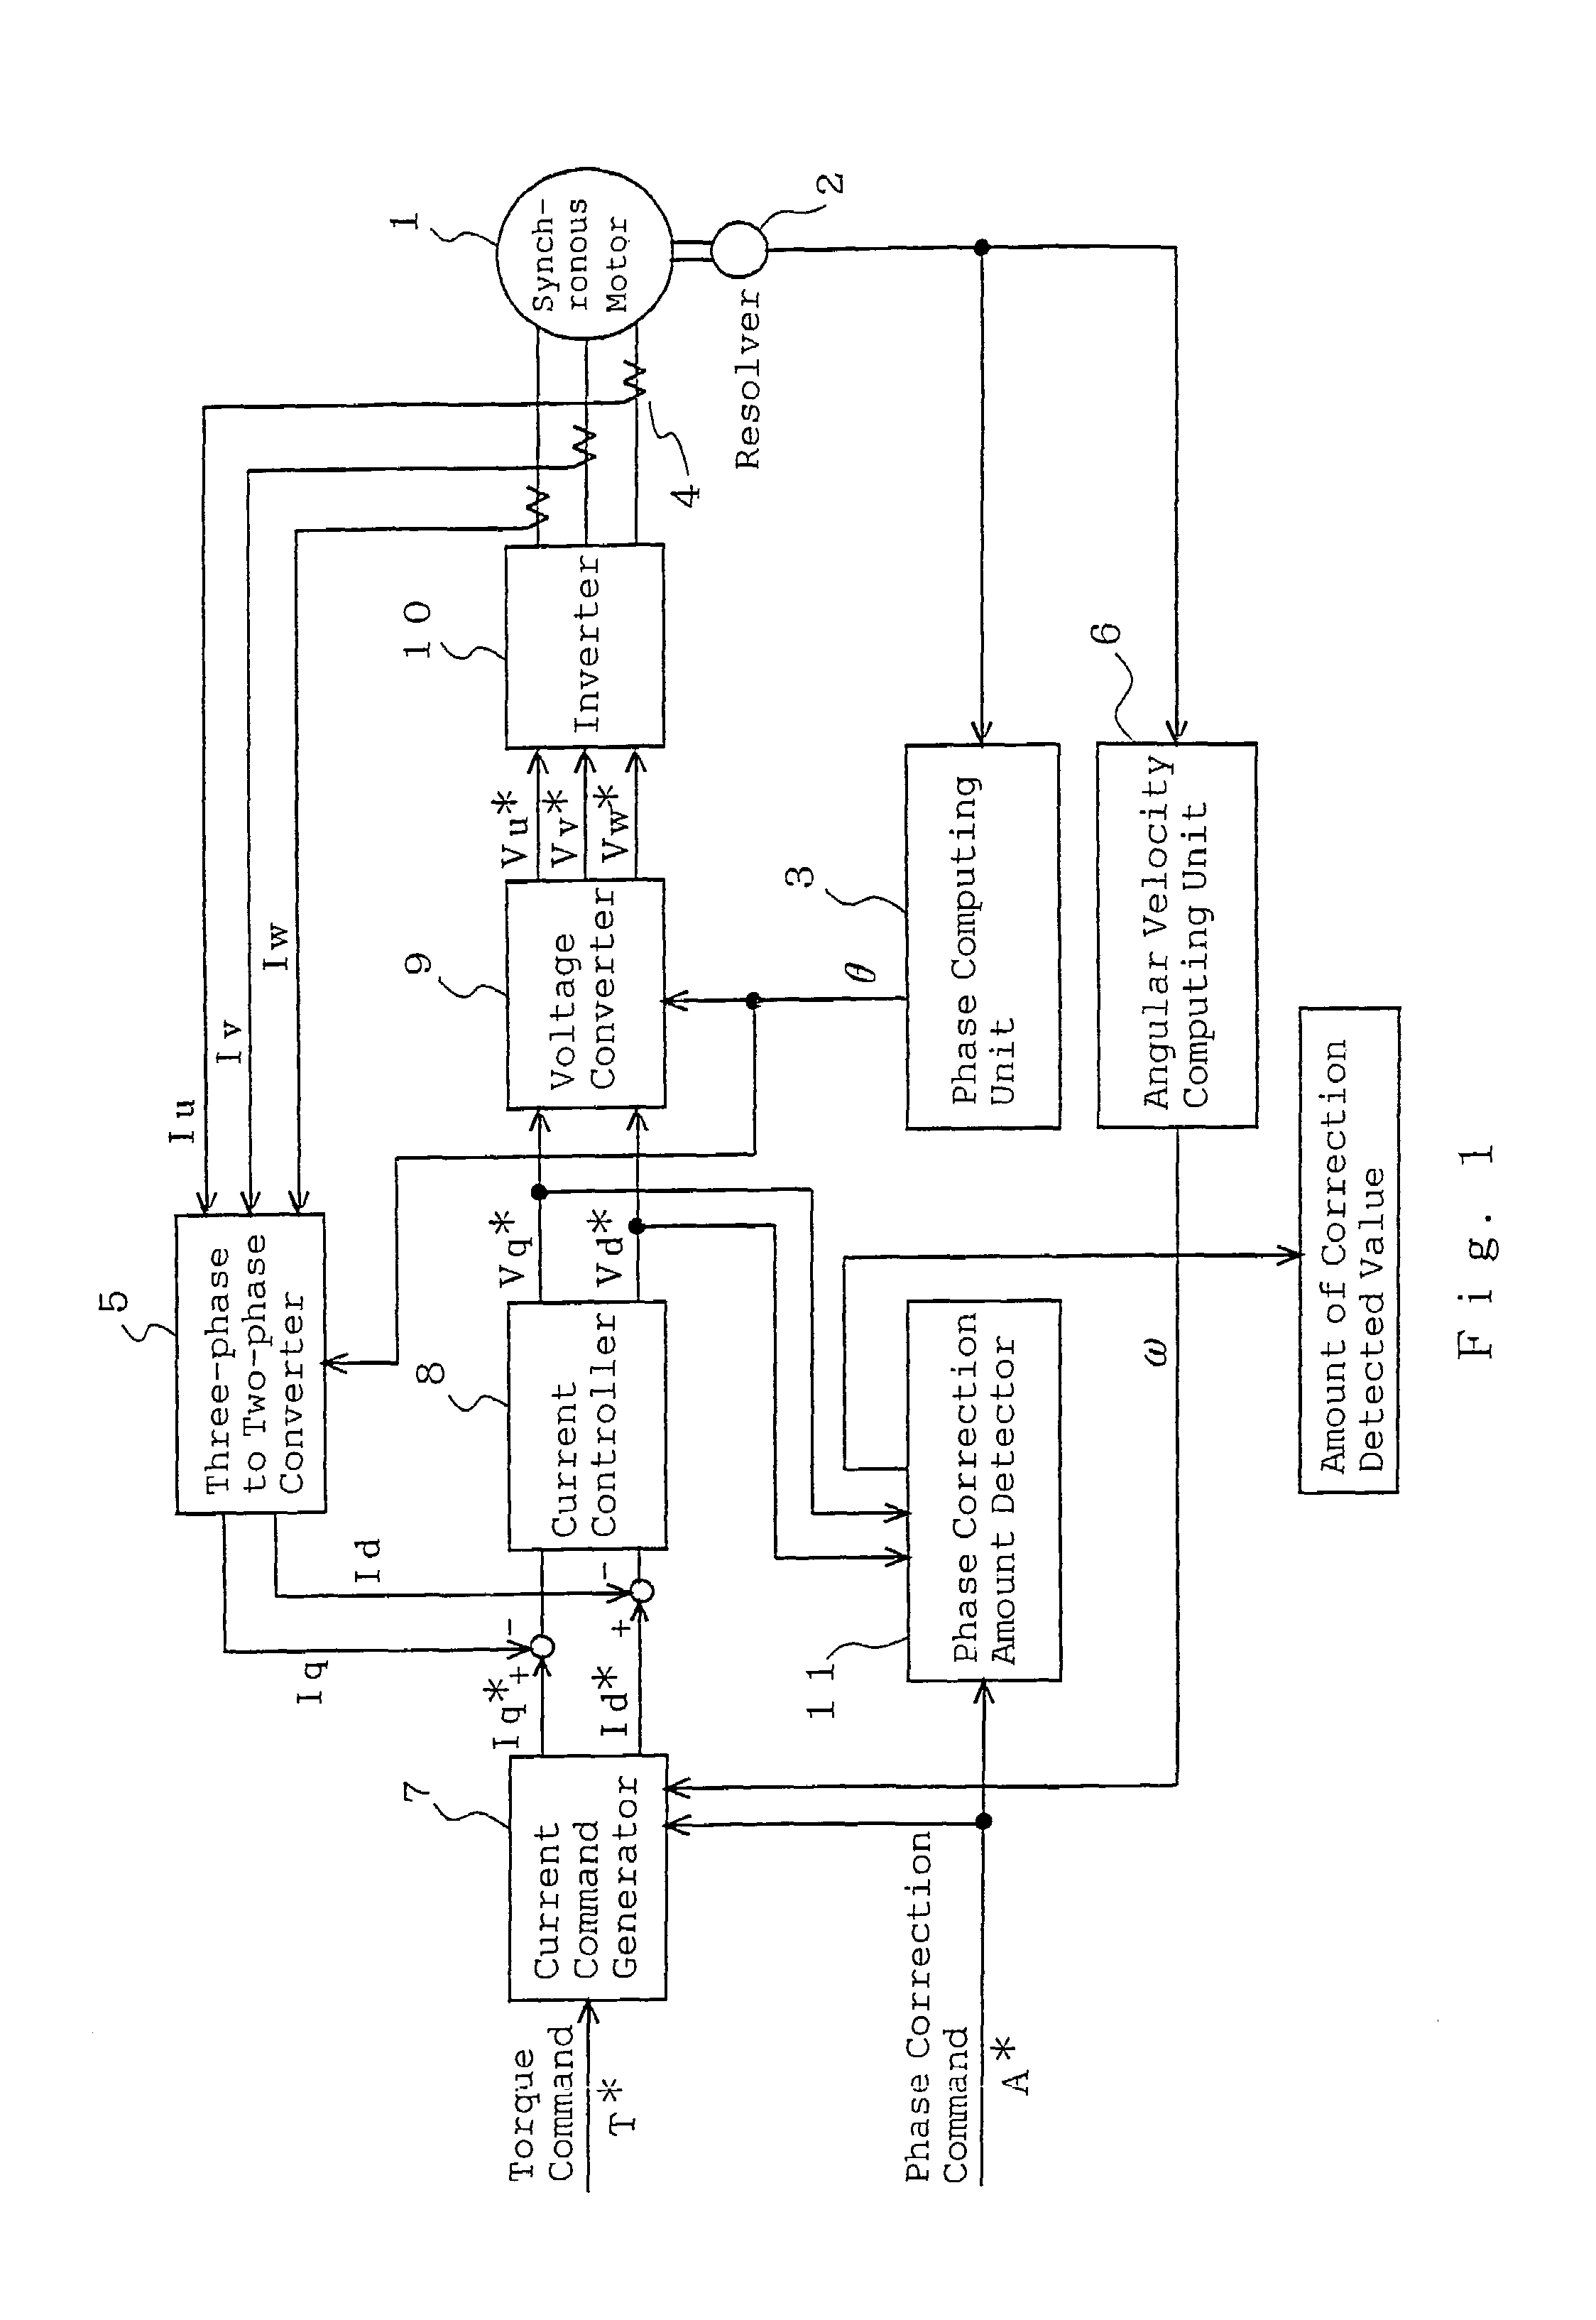 Adjustment method of rotor position detection of synchronous motor